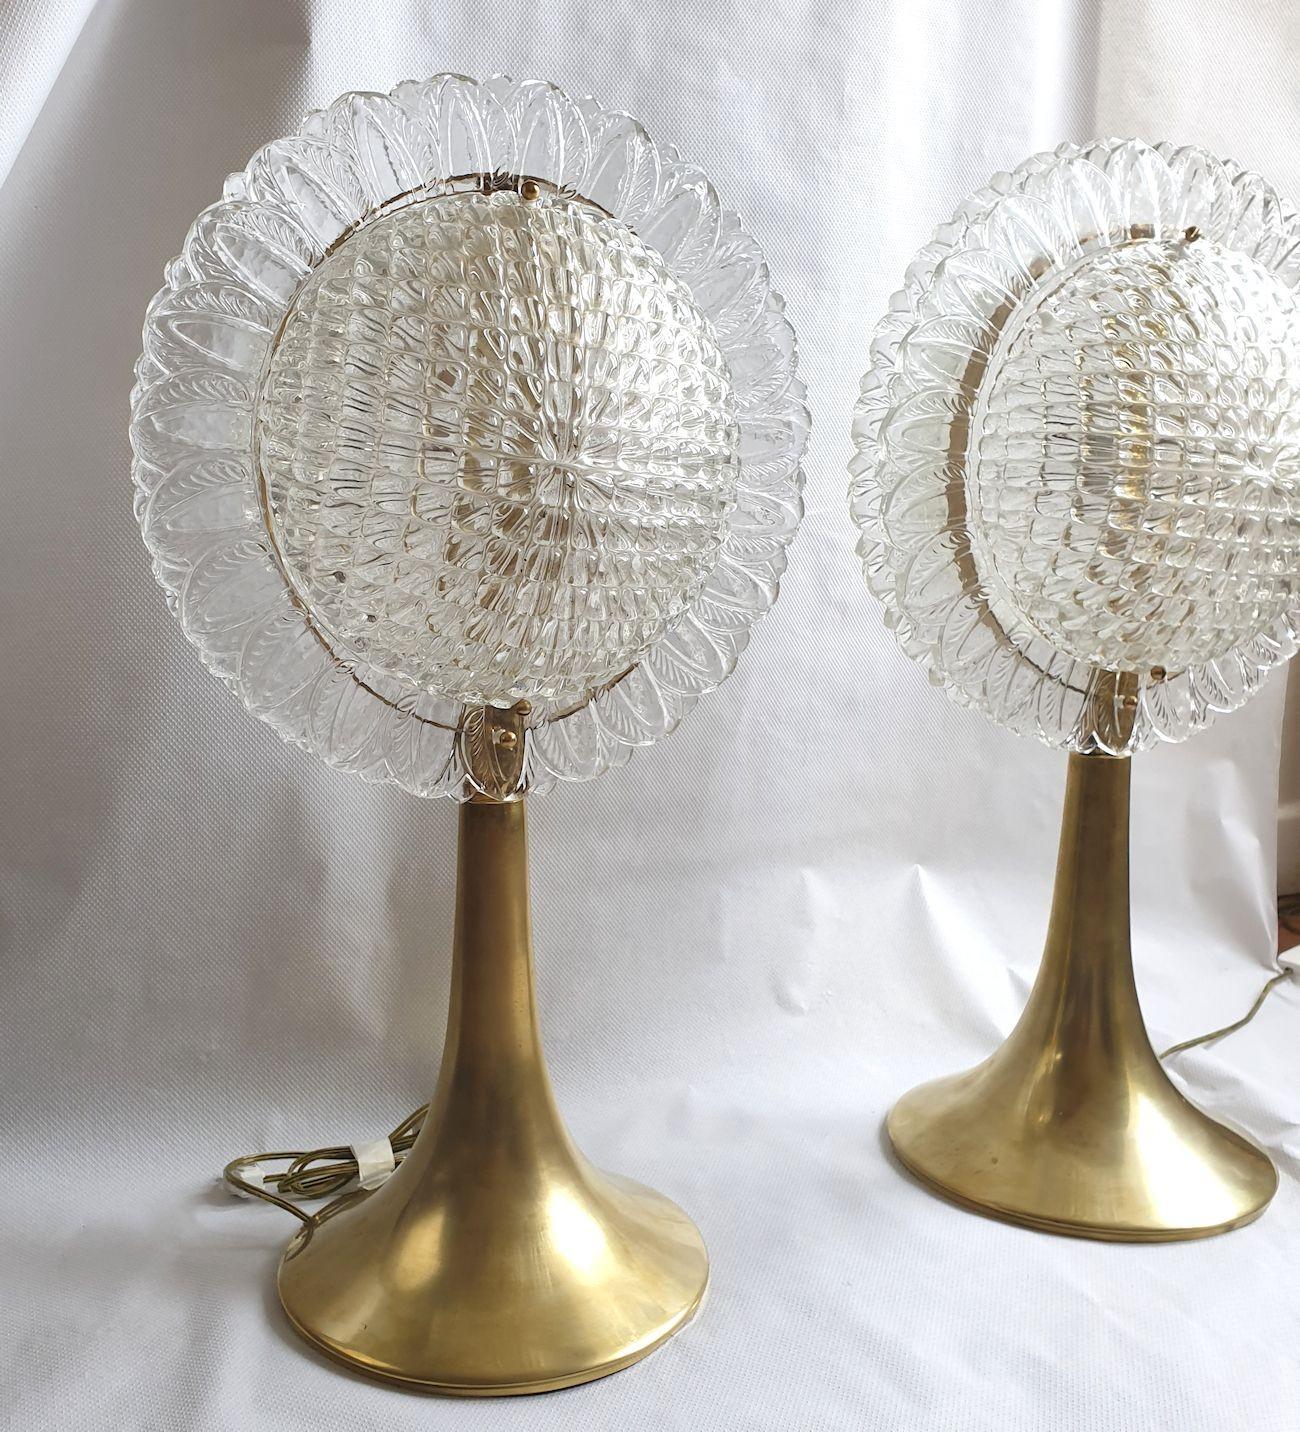 Pair of large Mid-Century Modern table lamps, attributed to Mazzega, Italy 1960s.
The vintage lamps are made of brass mounts and a Murano glass clear and translucent shade.
The lamps have one polished brass central leg, with a modern tulip